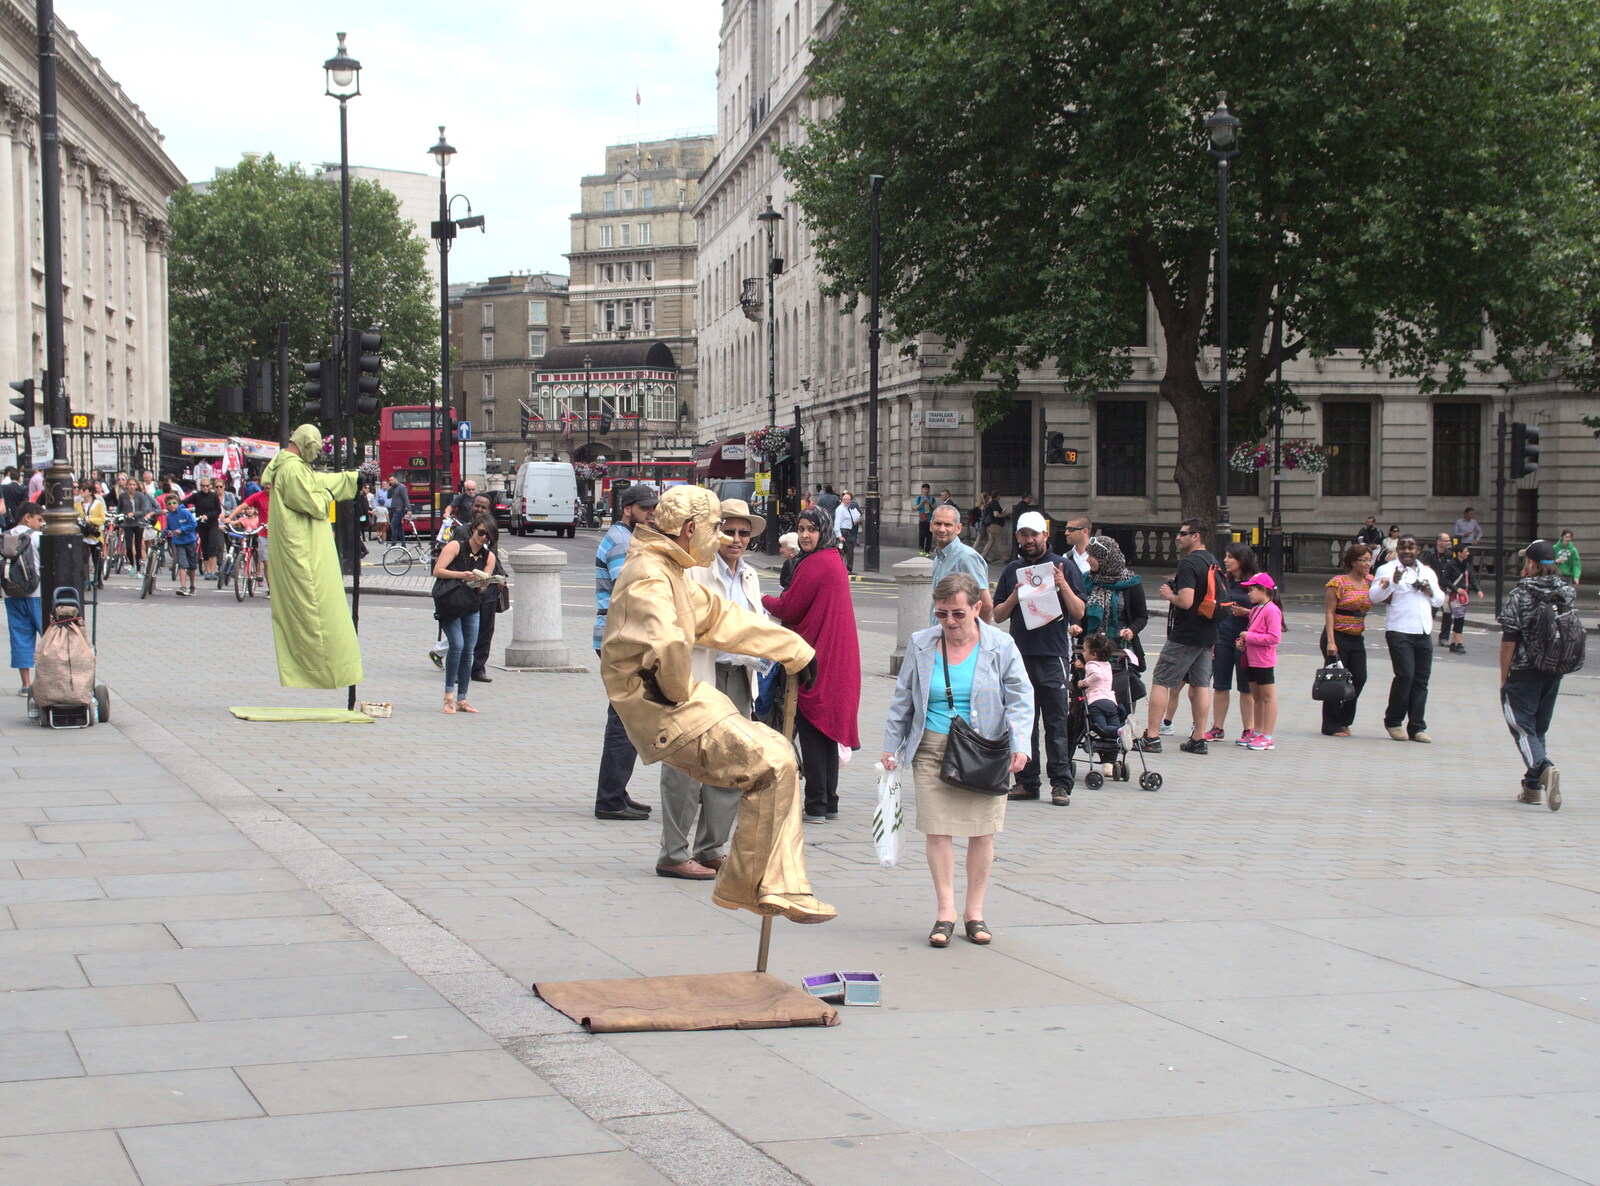 Lots of 'floating' human statues hang around from SwiftKey Innovation Days, The Haymarket, London - 27th June 2014